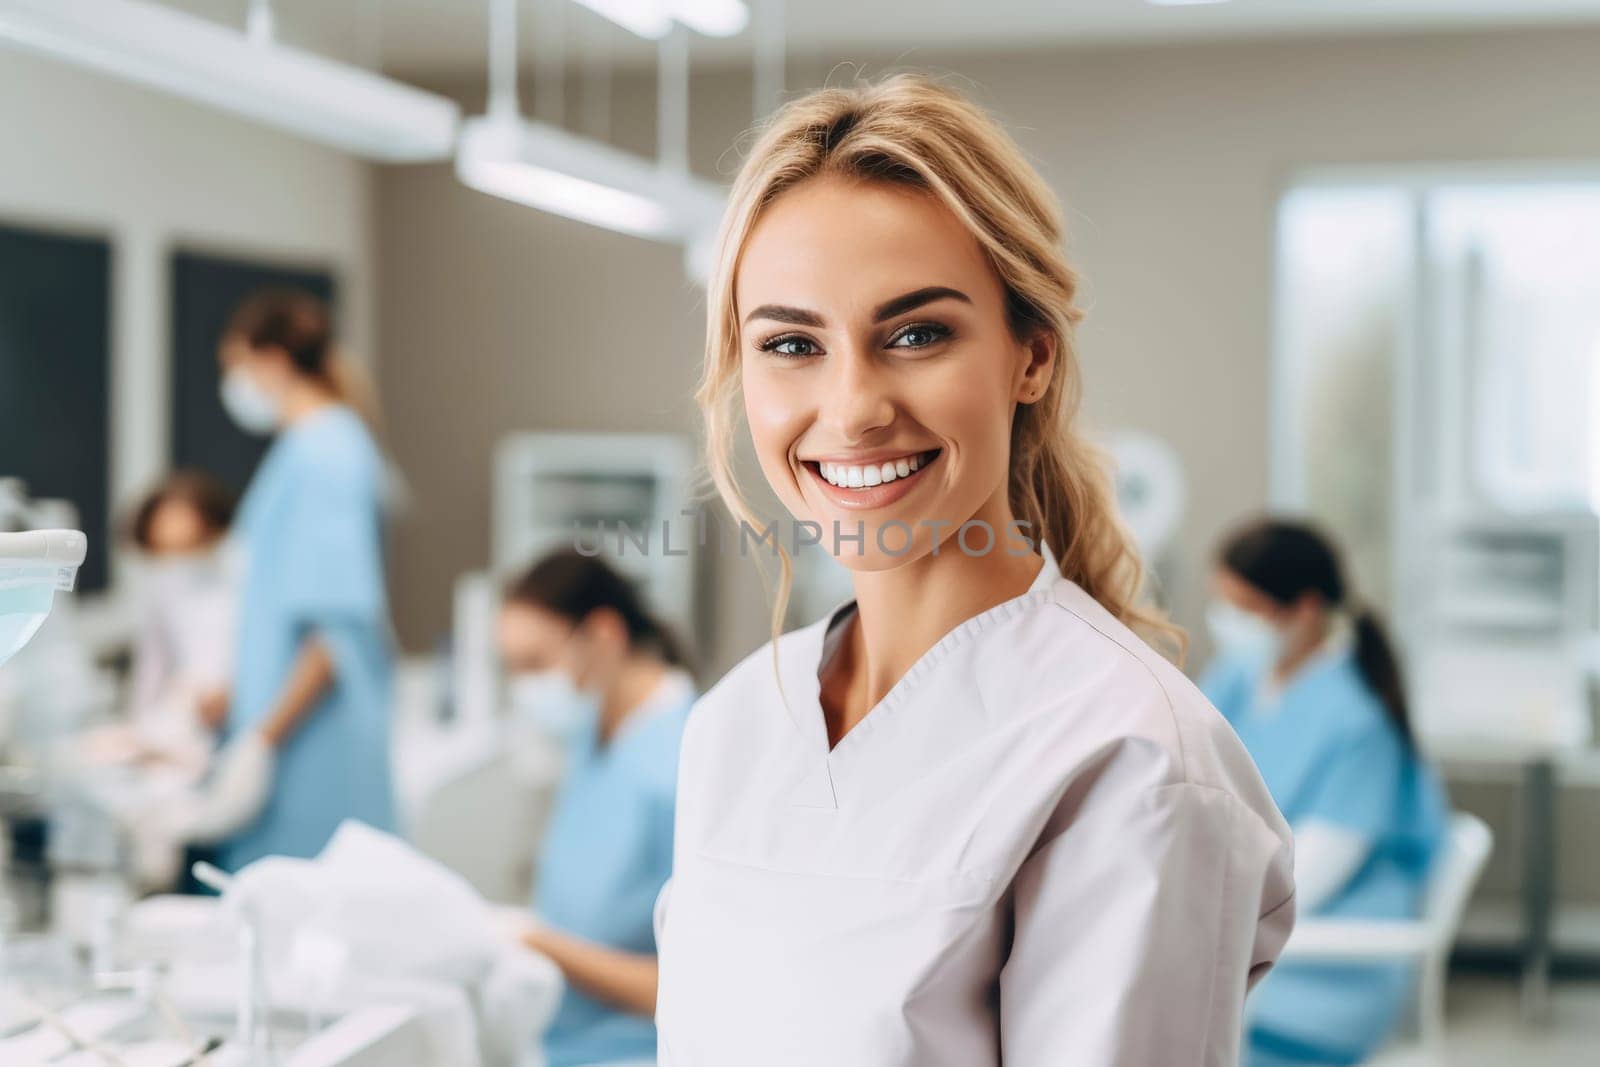 Smiling Female Dentist in Professional Setting by andreyz